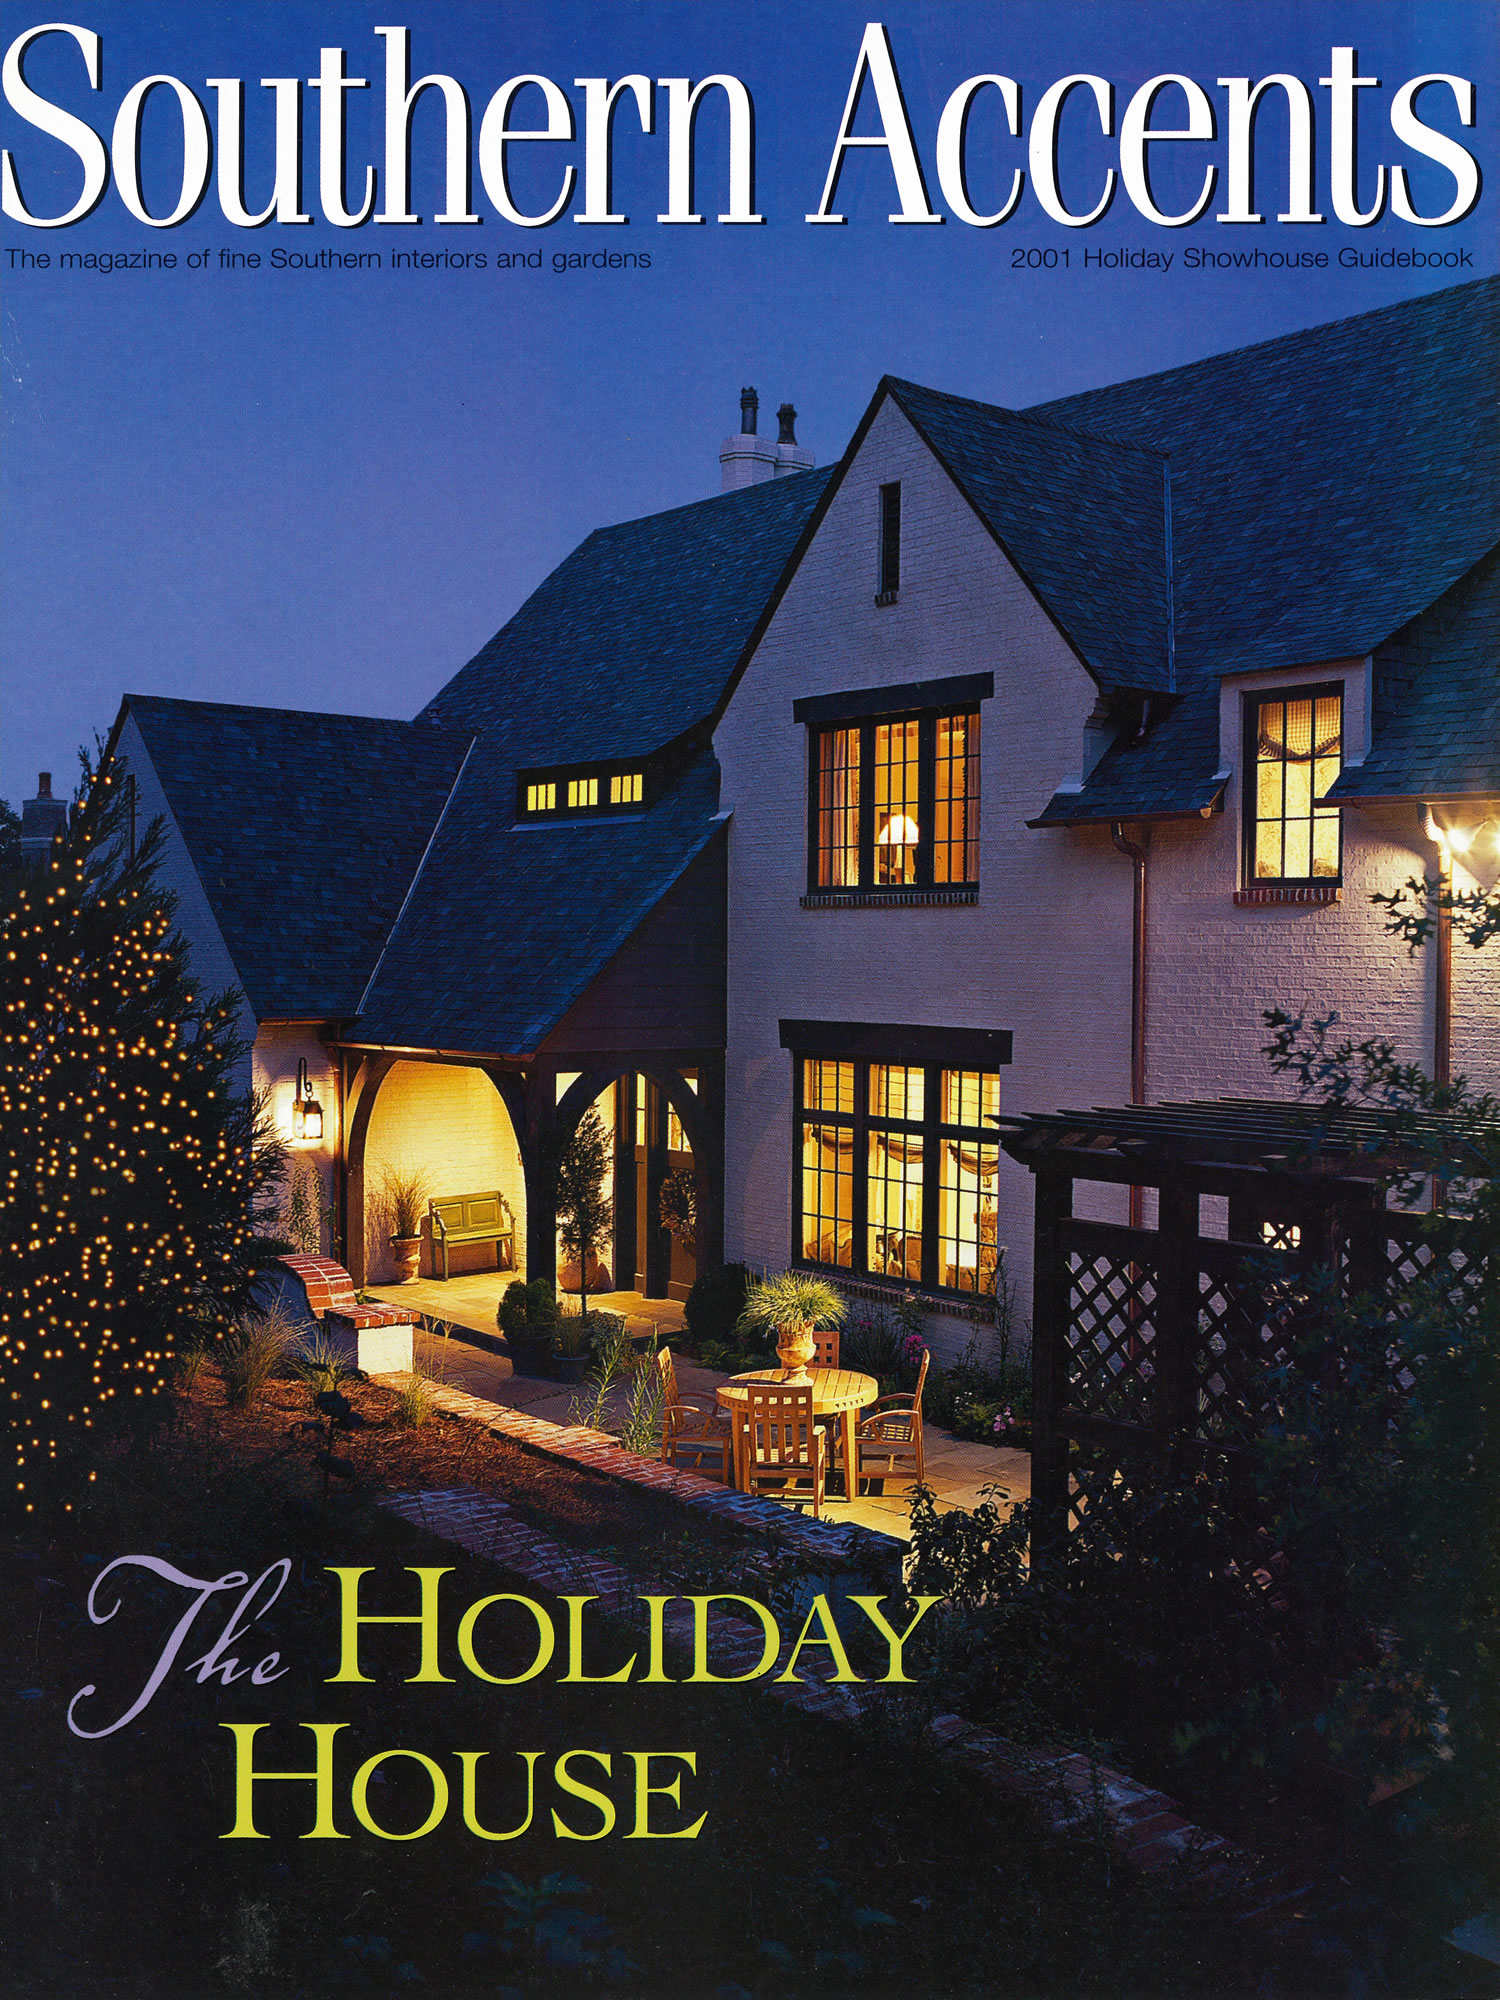 Southern Accents The Holiday House, Front Page 2001